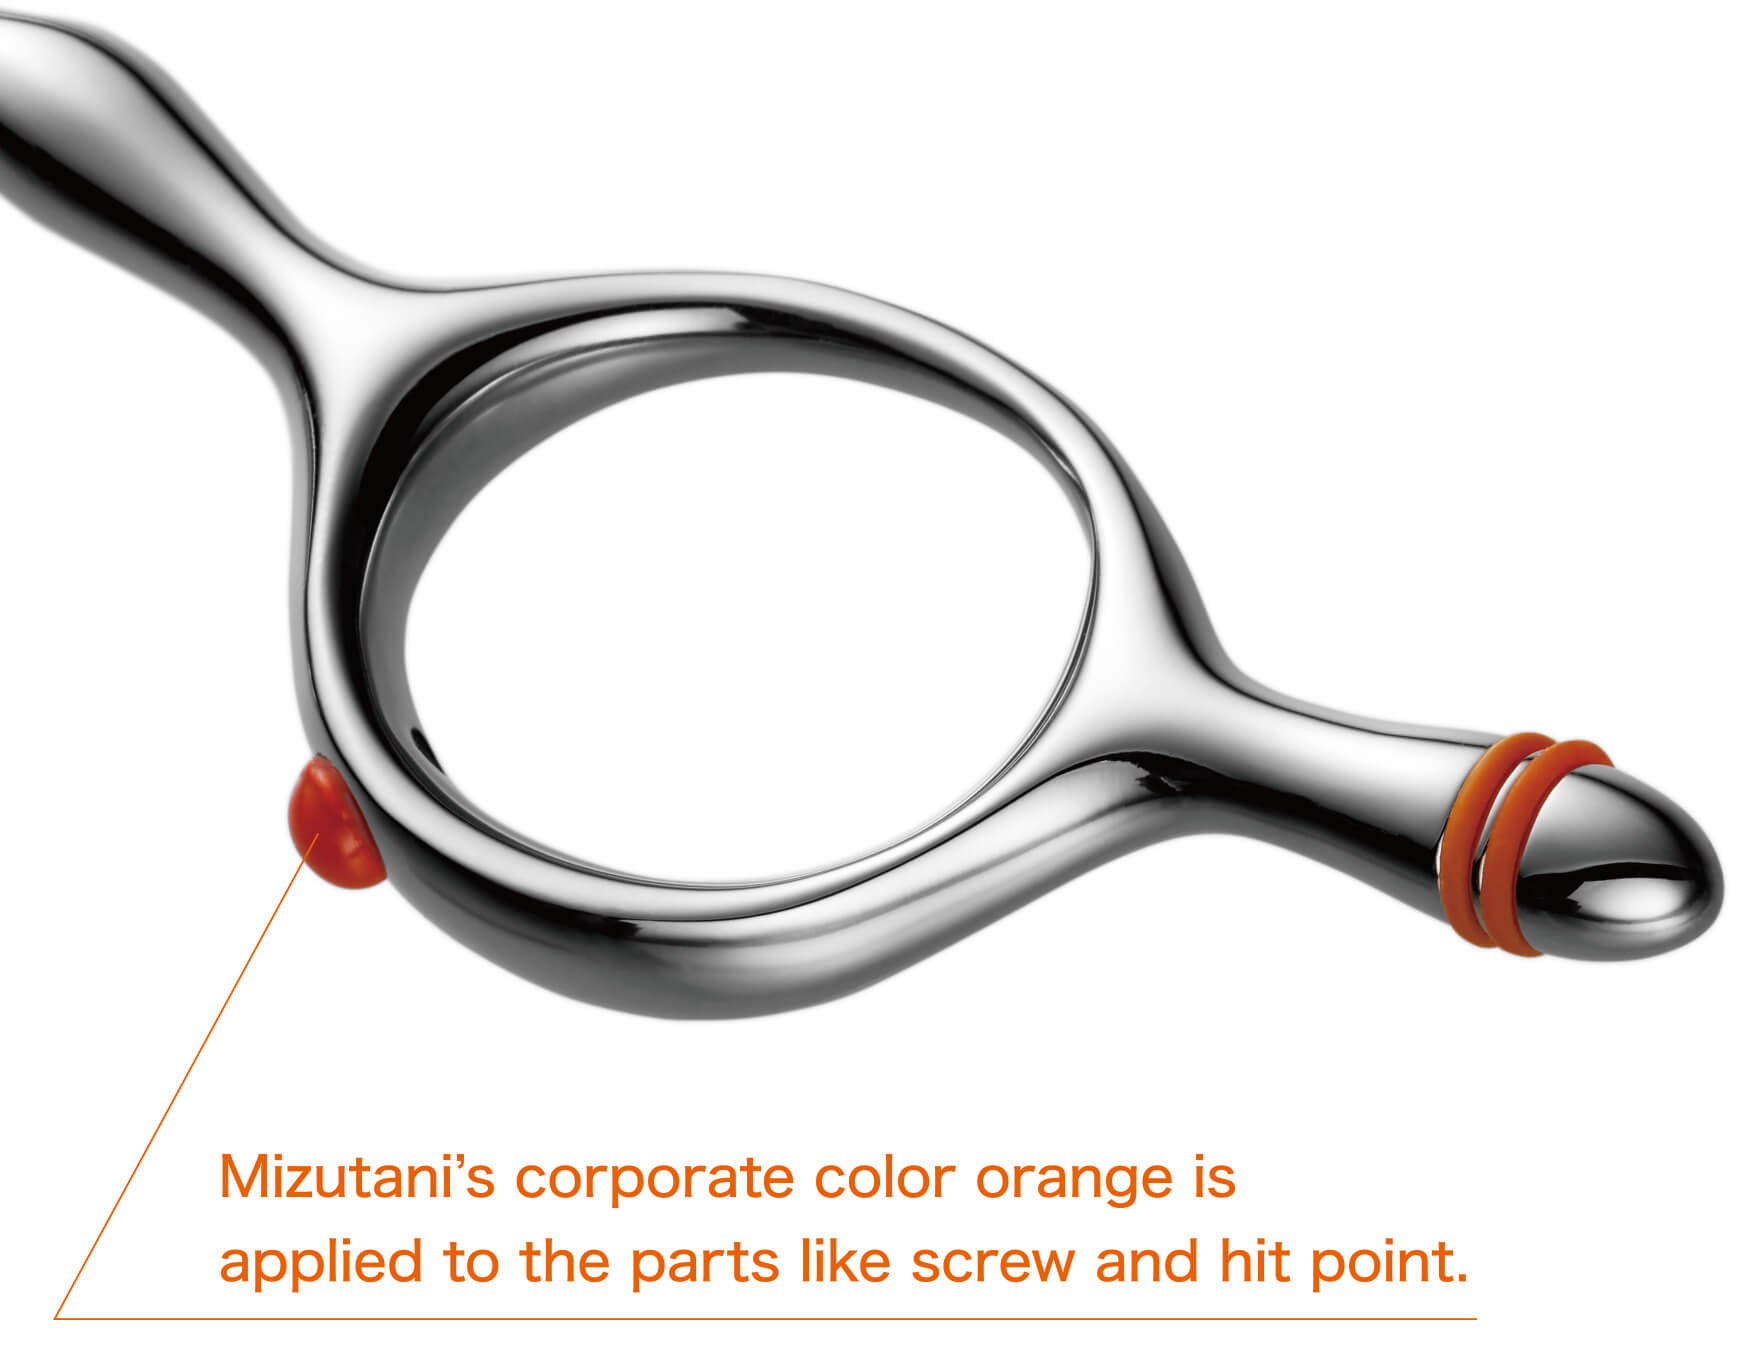 Mizutani’s corporate color orange is applied to the parts like screw and hit point.